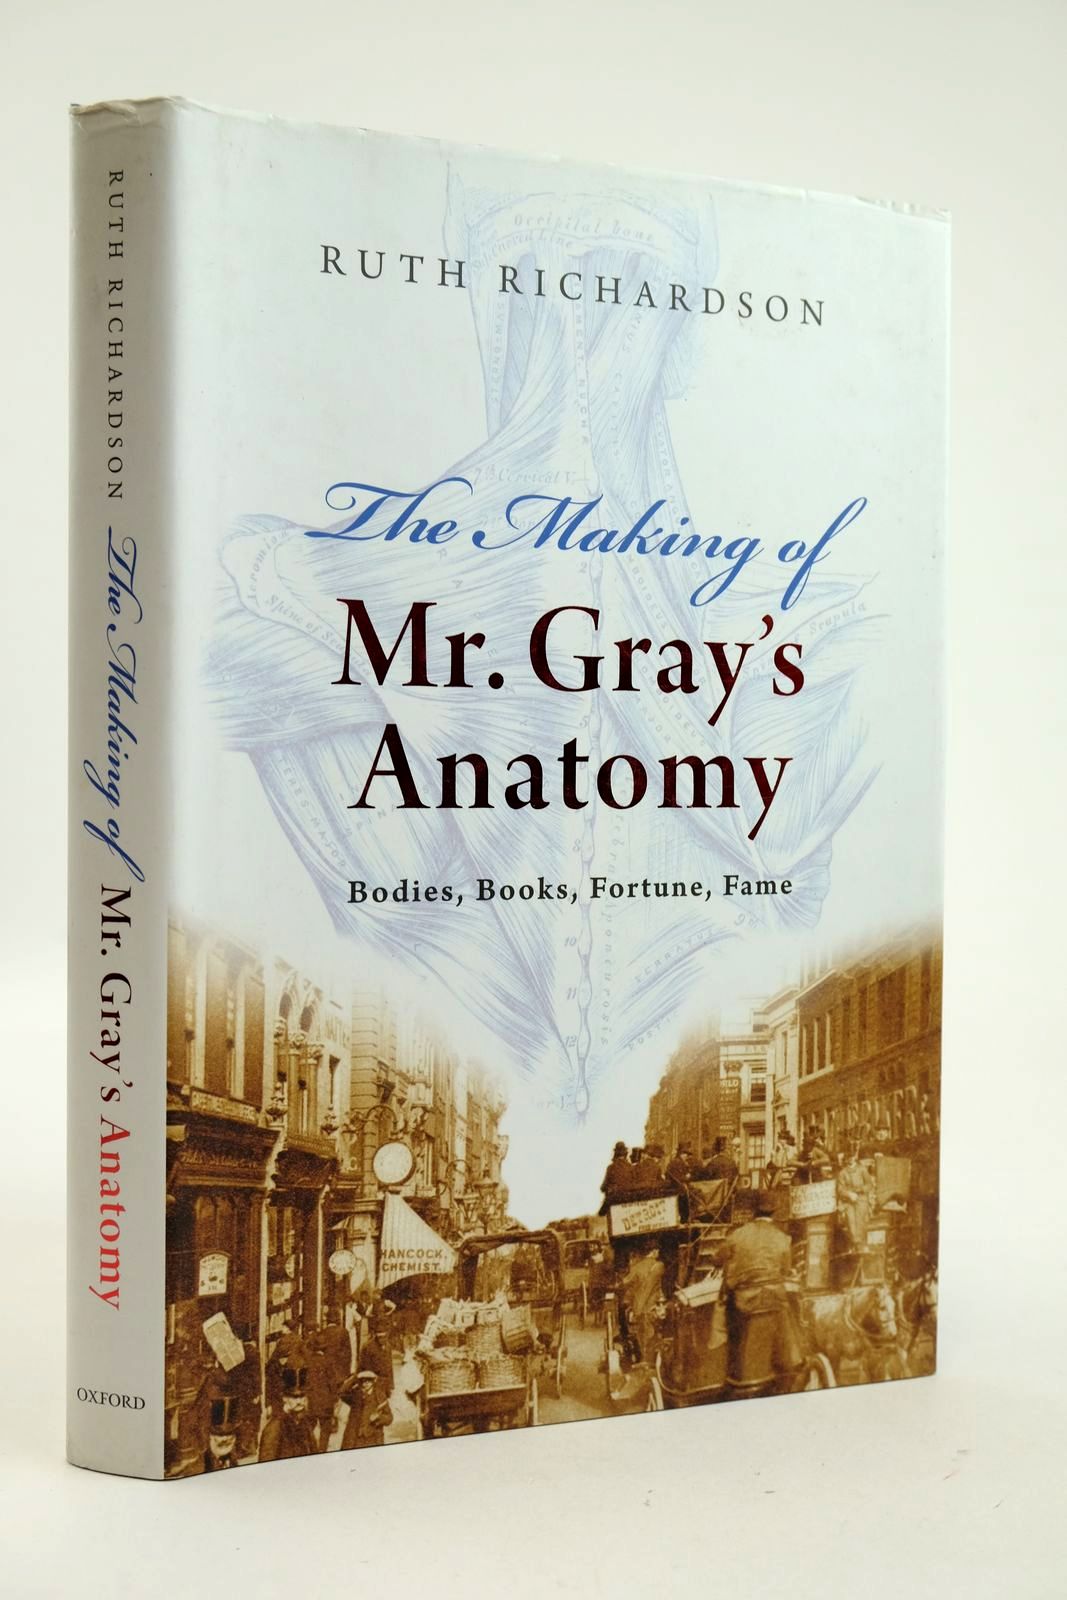 Photo of THE MAKING OF MR. GRAY'S ANATOMY- Stock Number: 2132946